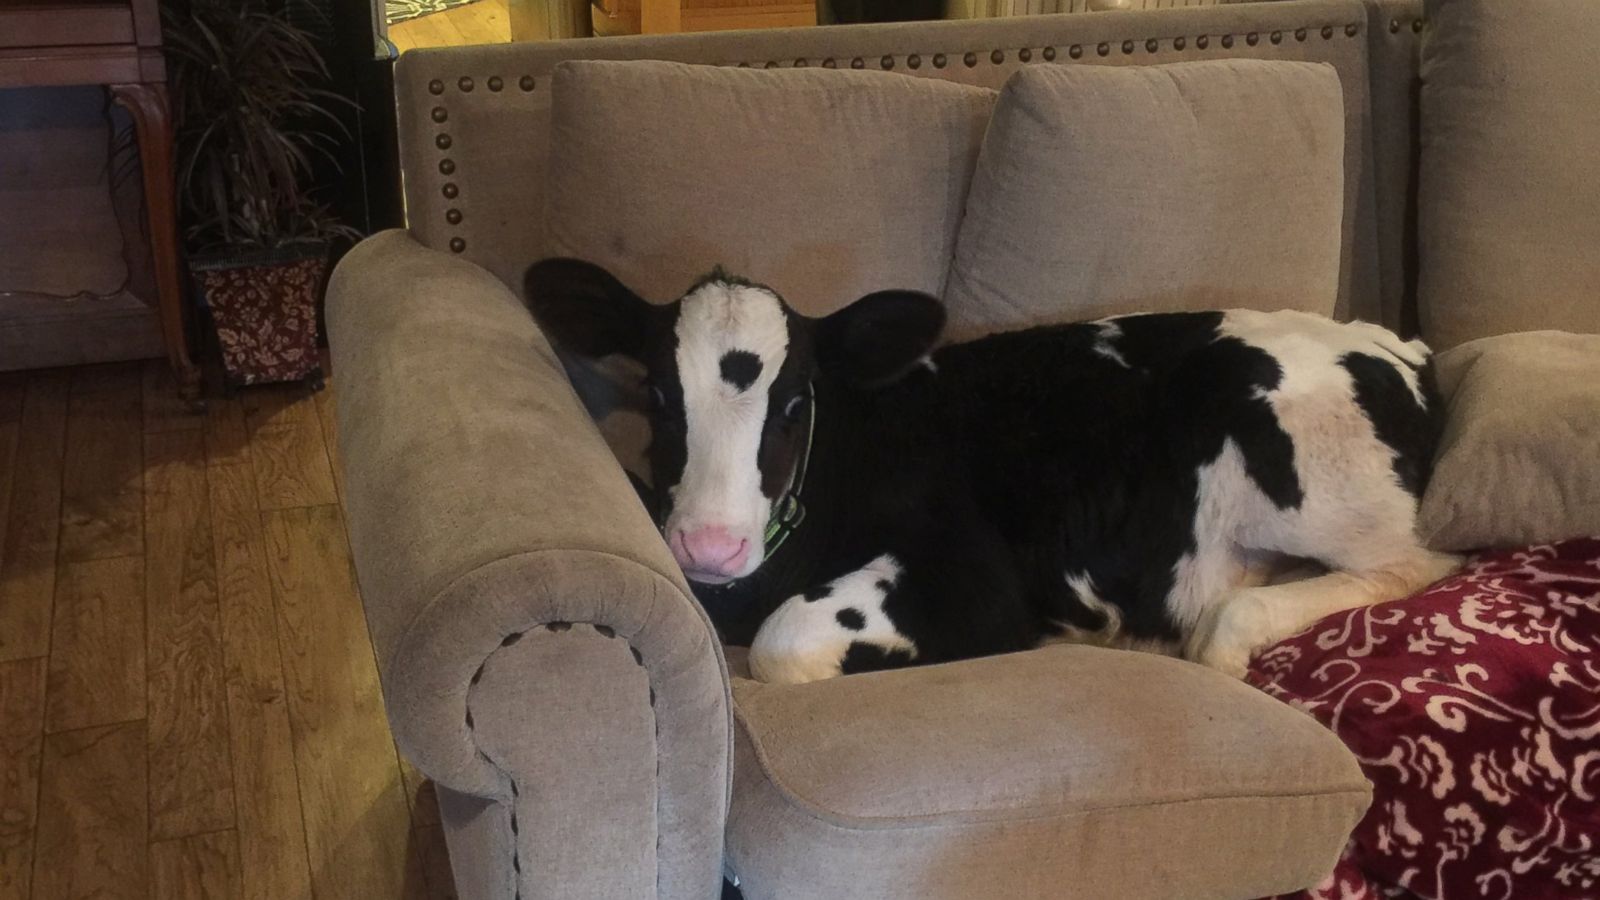 Meet Goliath, the Adorable Baby Cow That Thinks He's a Dog - ABC News